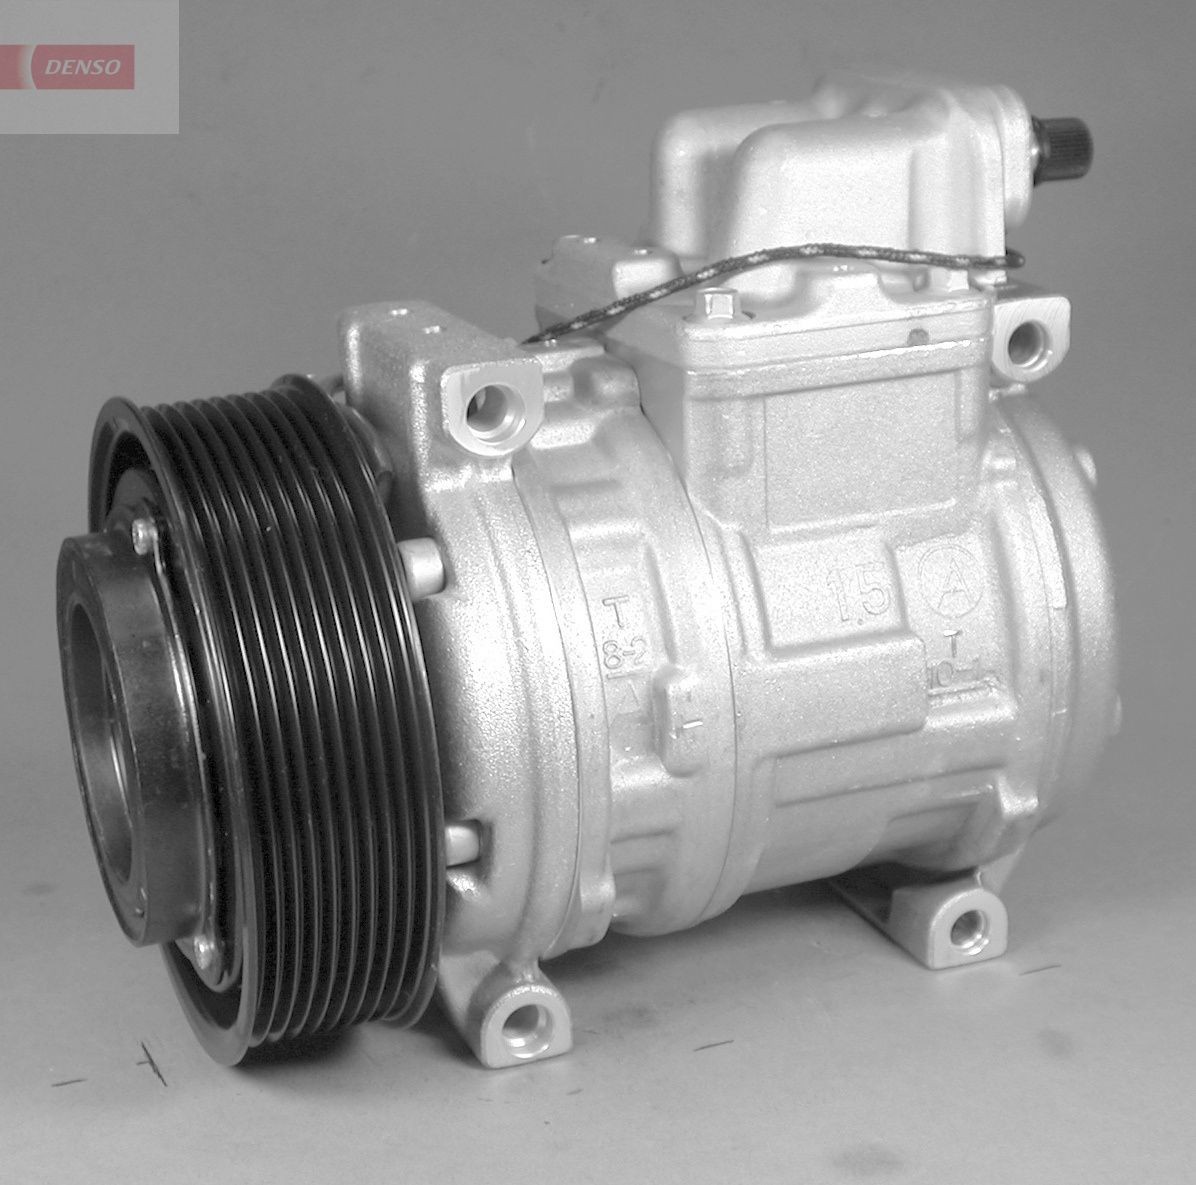 DENSO DCP17034 Air conditioning compressor 10PA15C, 24V, PAG 46, R 134a, with magnetic clutch